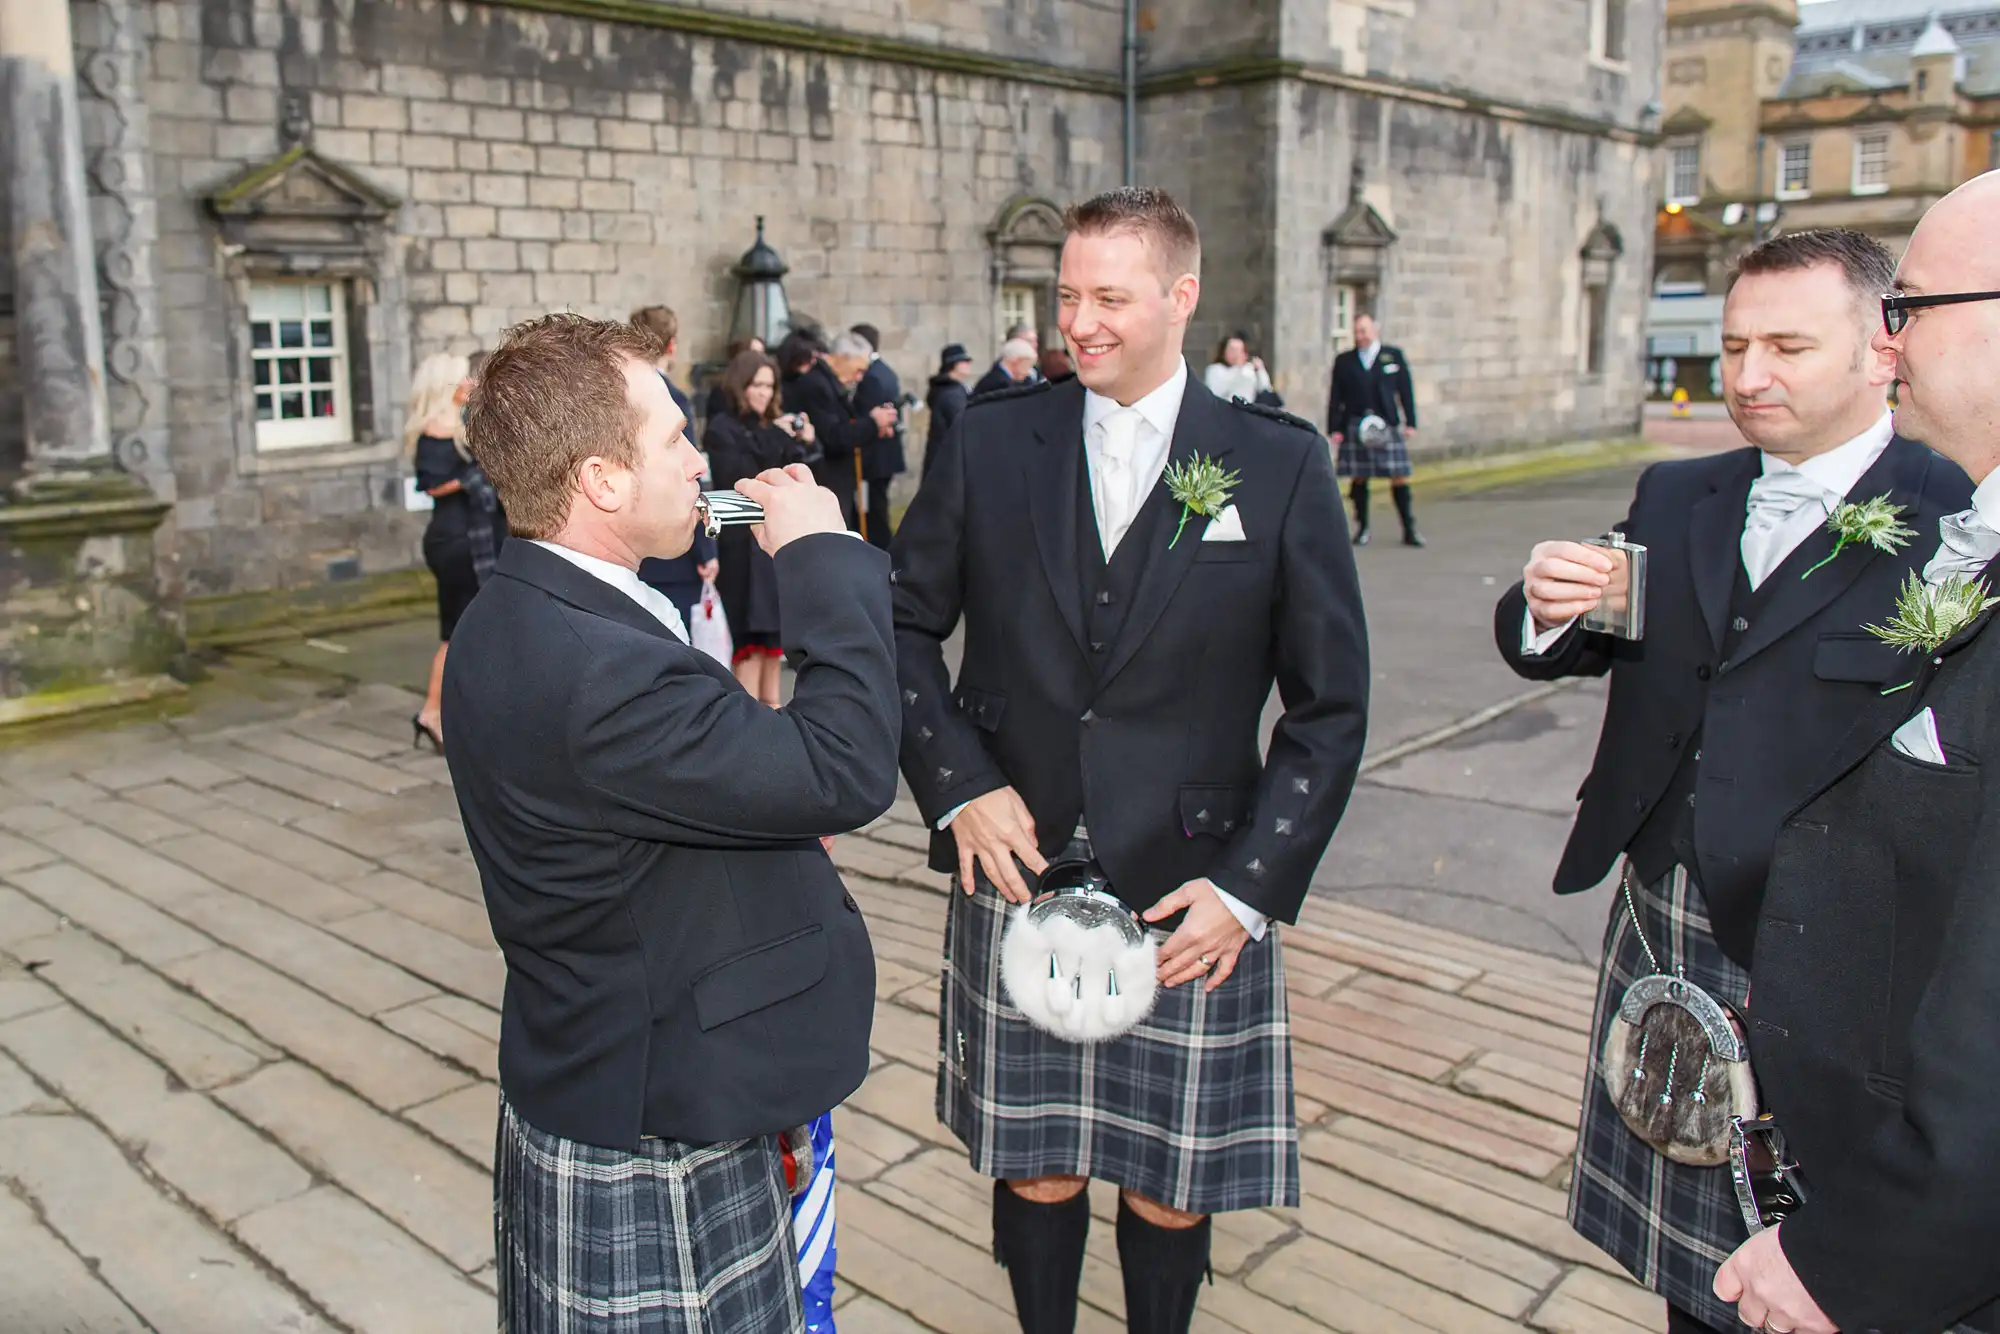 Men in traditional scottish kilts and jackets at a formal gathering, conversing and laughing outside a stone building.